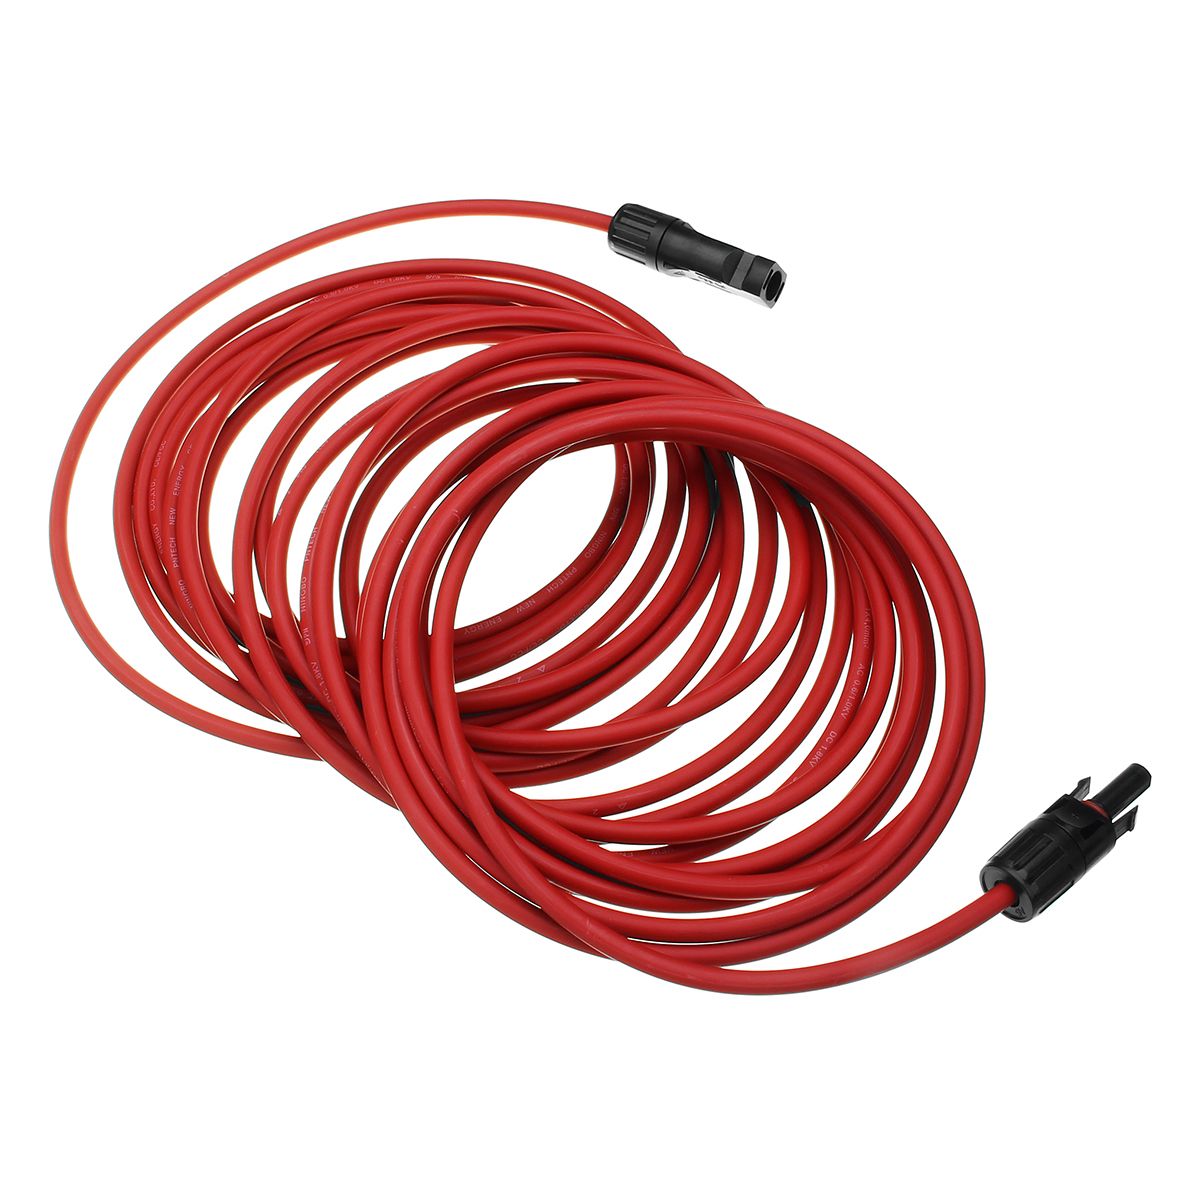 BlackRed-10M-12AWG-Solar-Panel-Extension-Cable-Wire-With-MC4-Connector-1322041